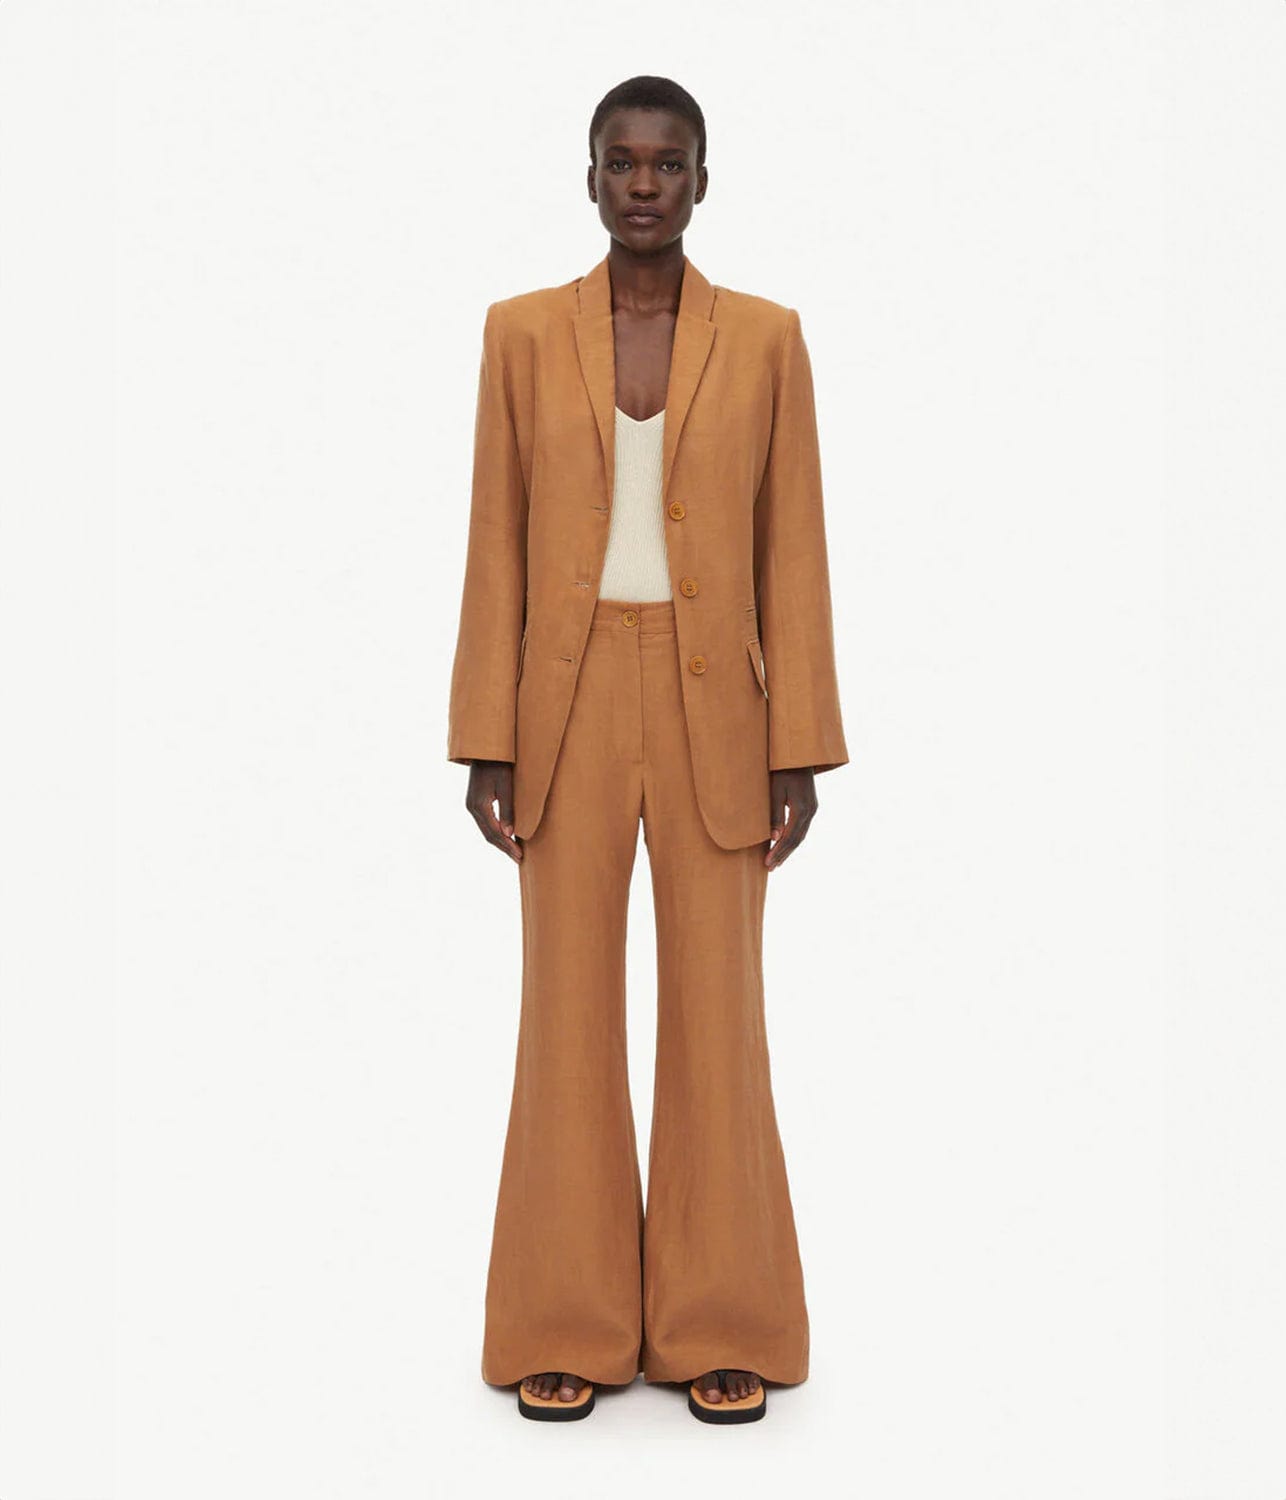 CARASS PANTS- TOBACCO | BY MALENE BIRGER | BY MALENE BIRGER CARASS PANTS- TOBACCO